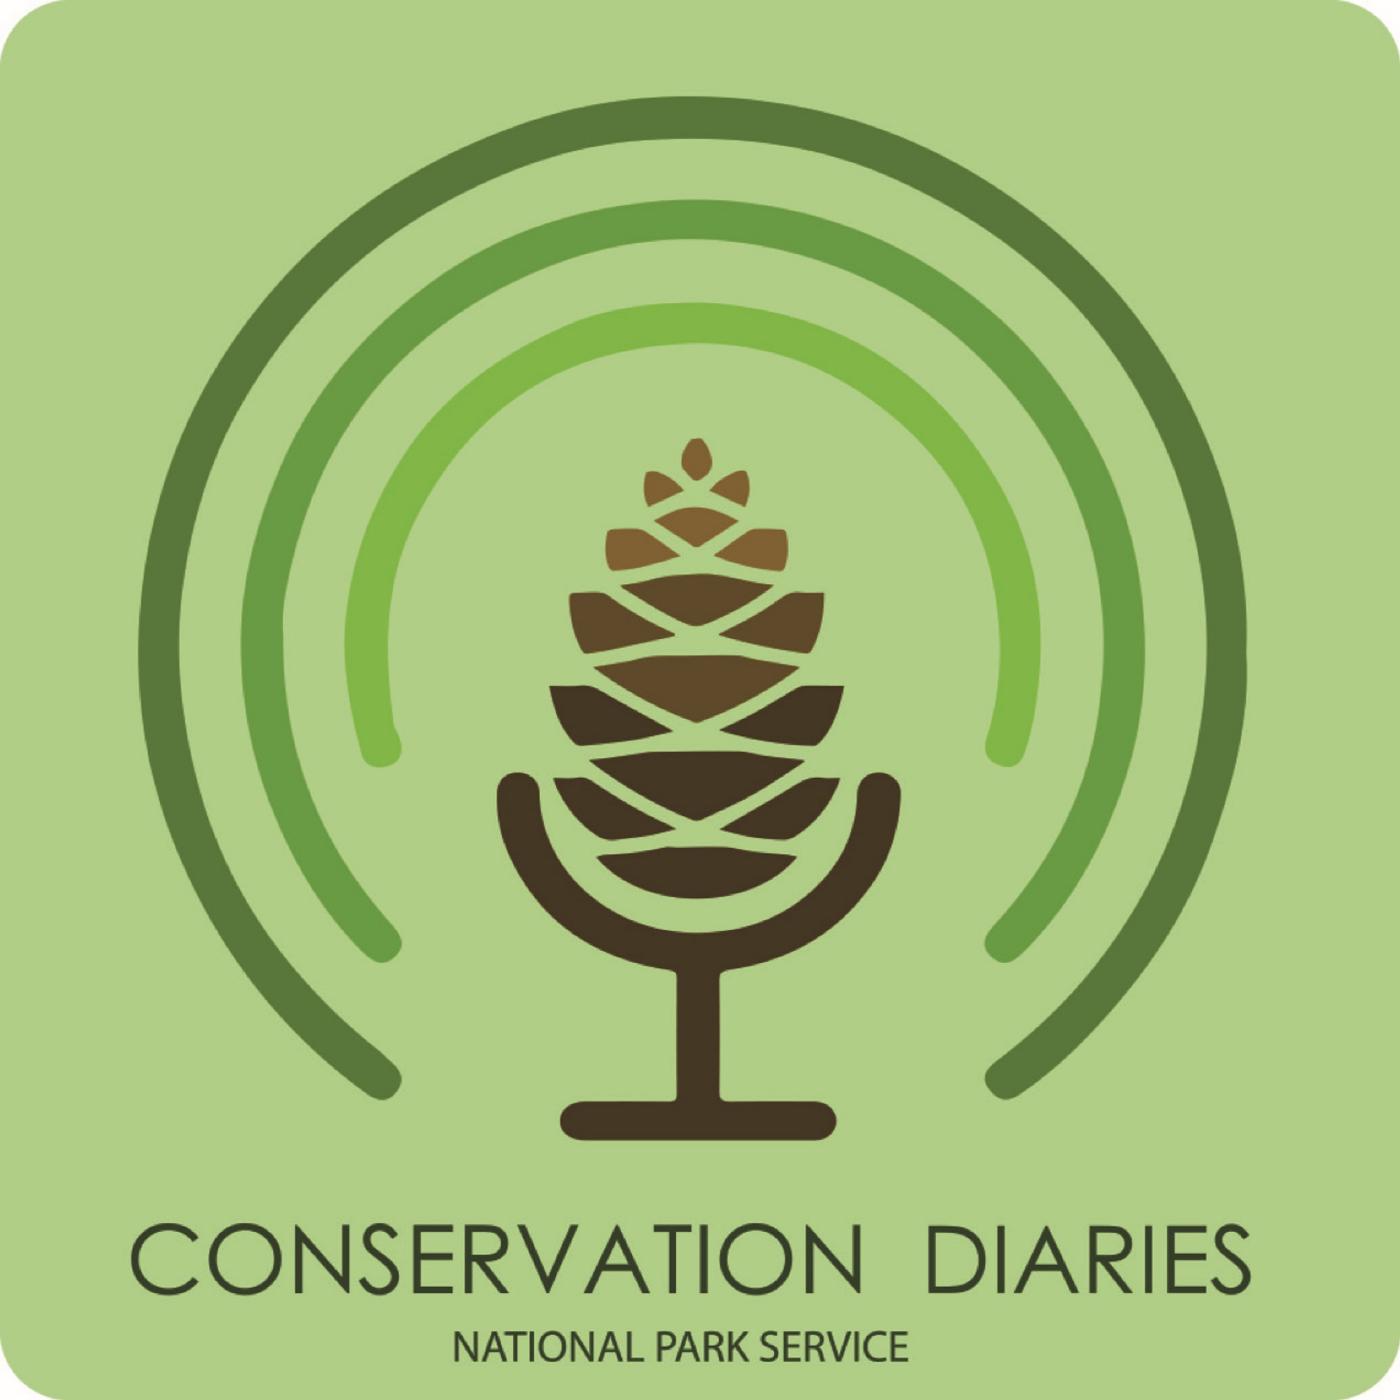 Image of a pine cone microphone with text reading "Conservation Diaries. National Park Service."